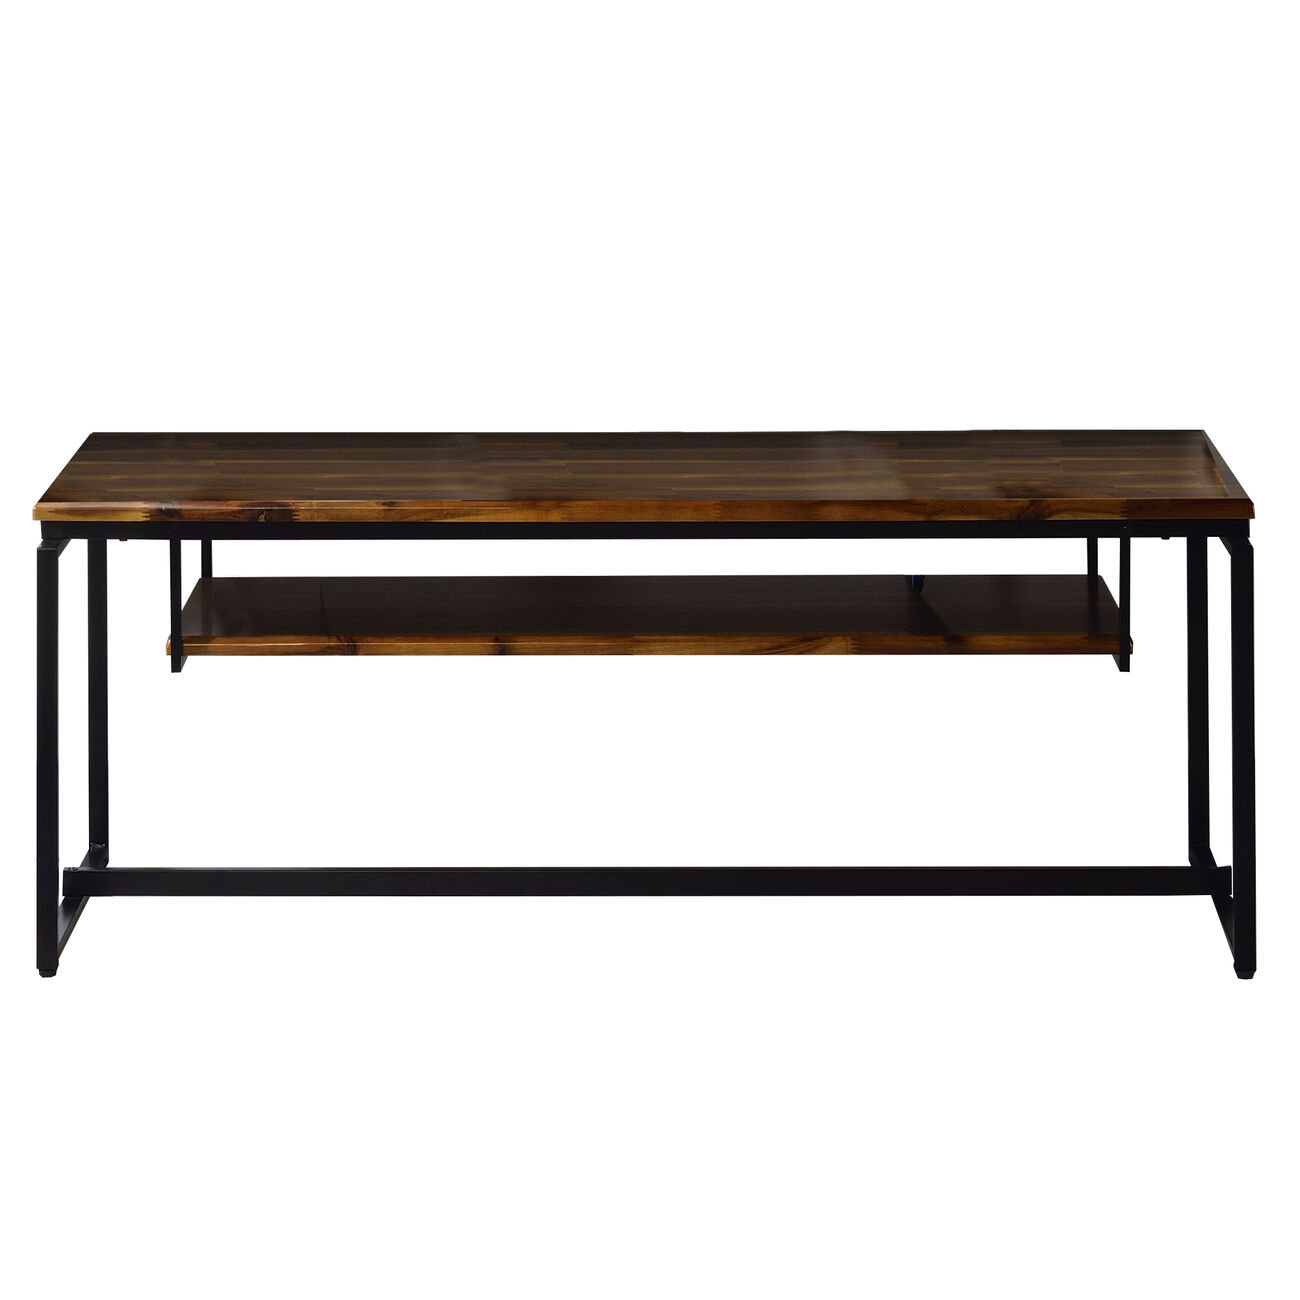 Metal TV Stand  Wooden Tabletop with and Open Shelf, Black and Brown